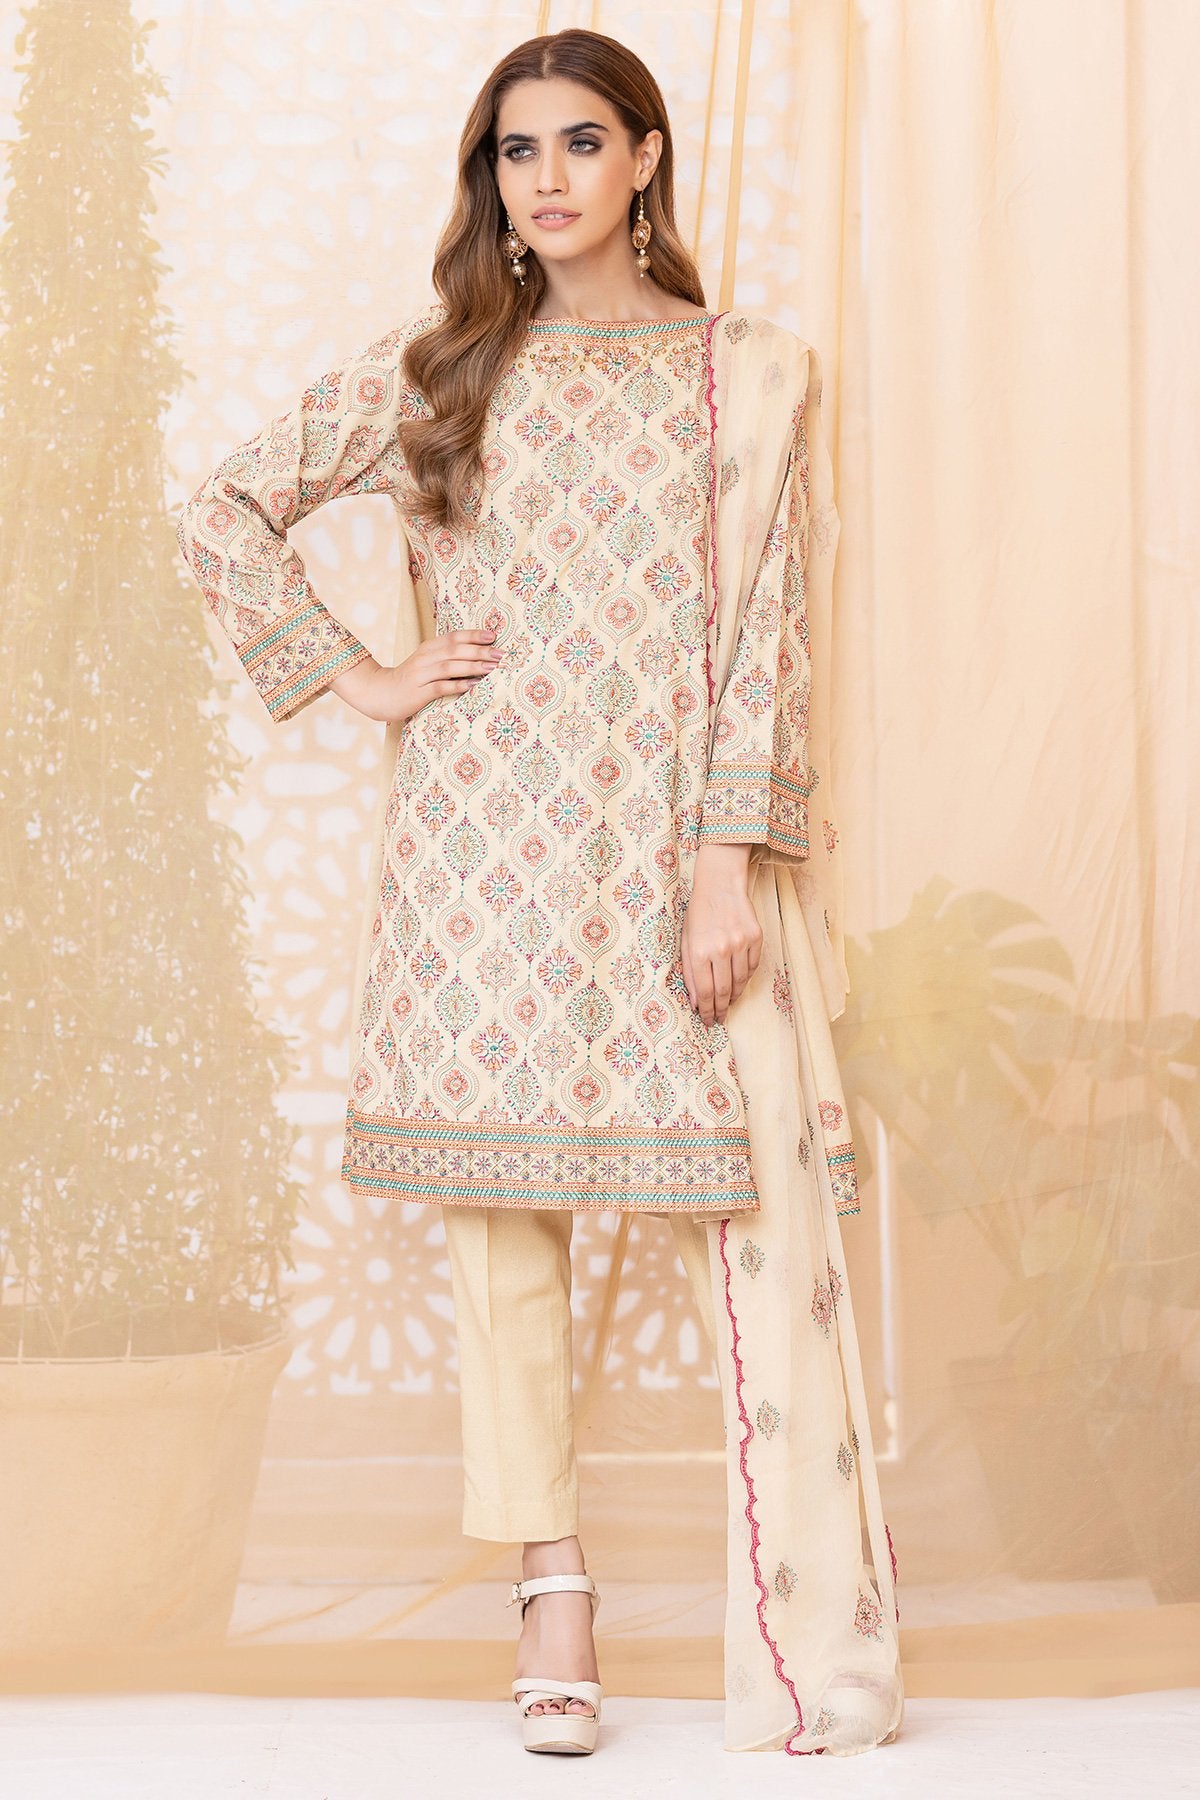 Dyed & Embroidered 3pc suit